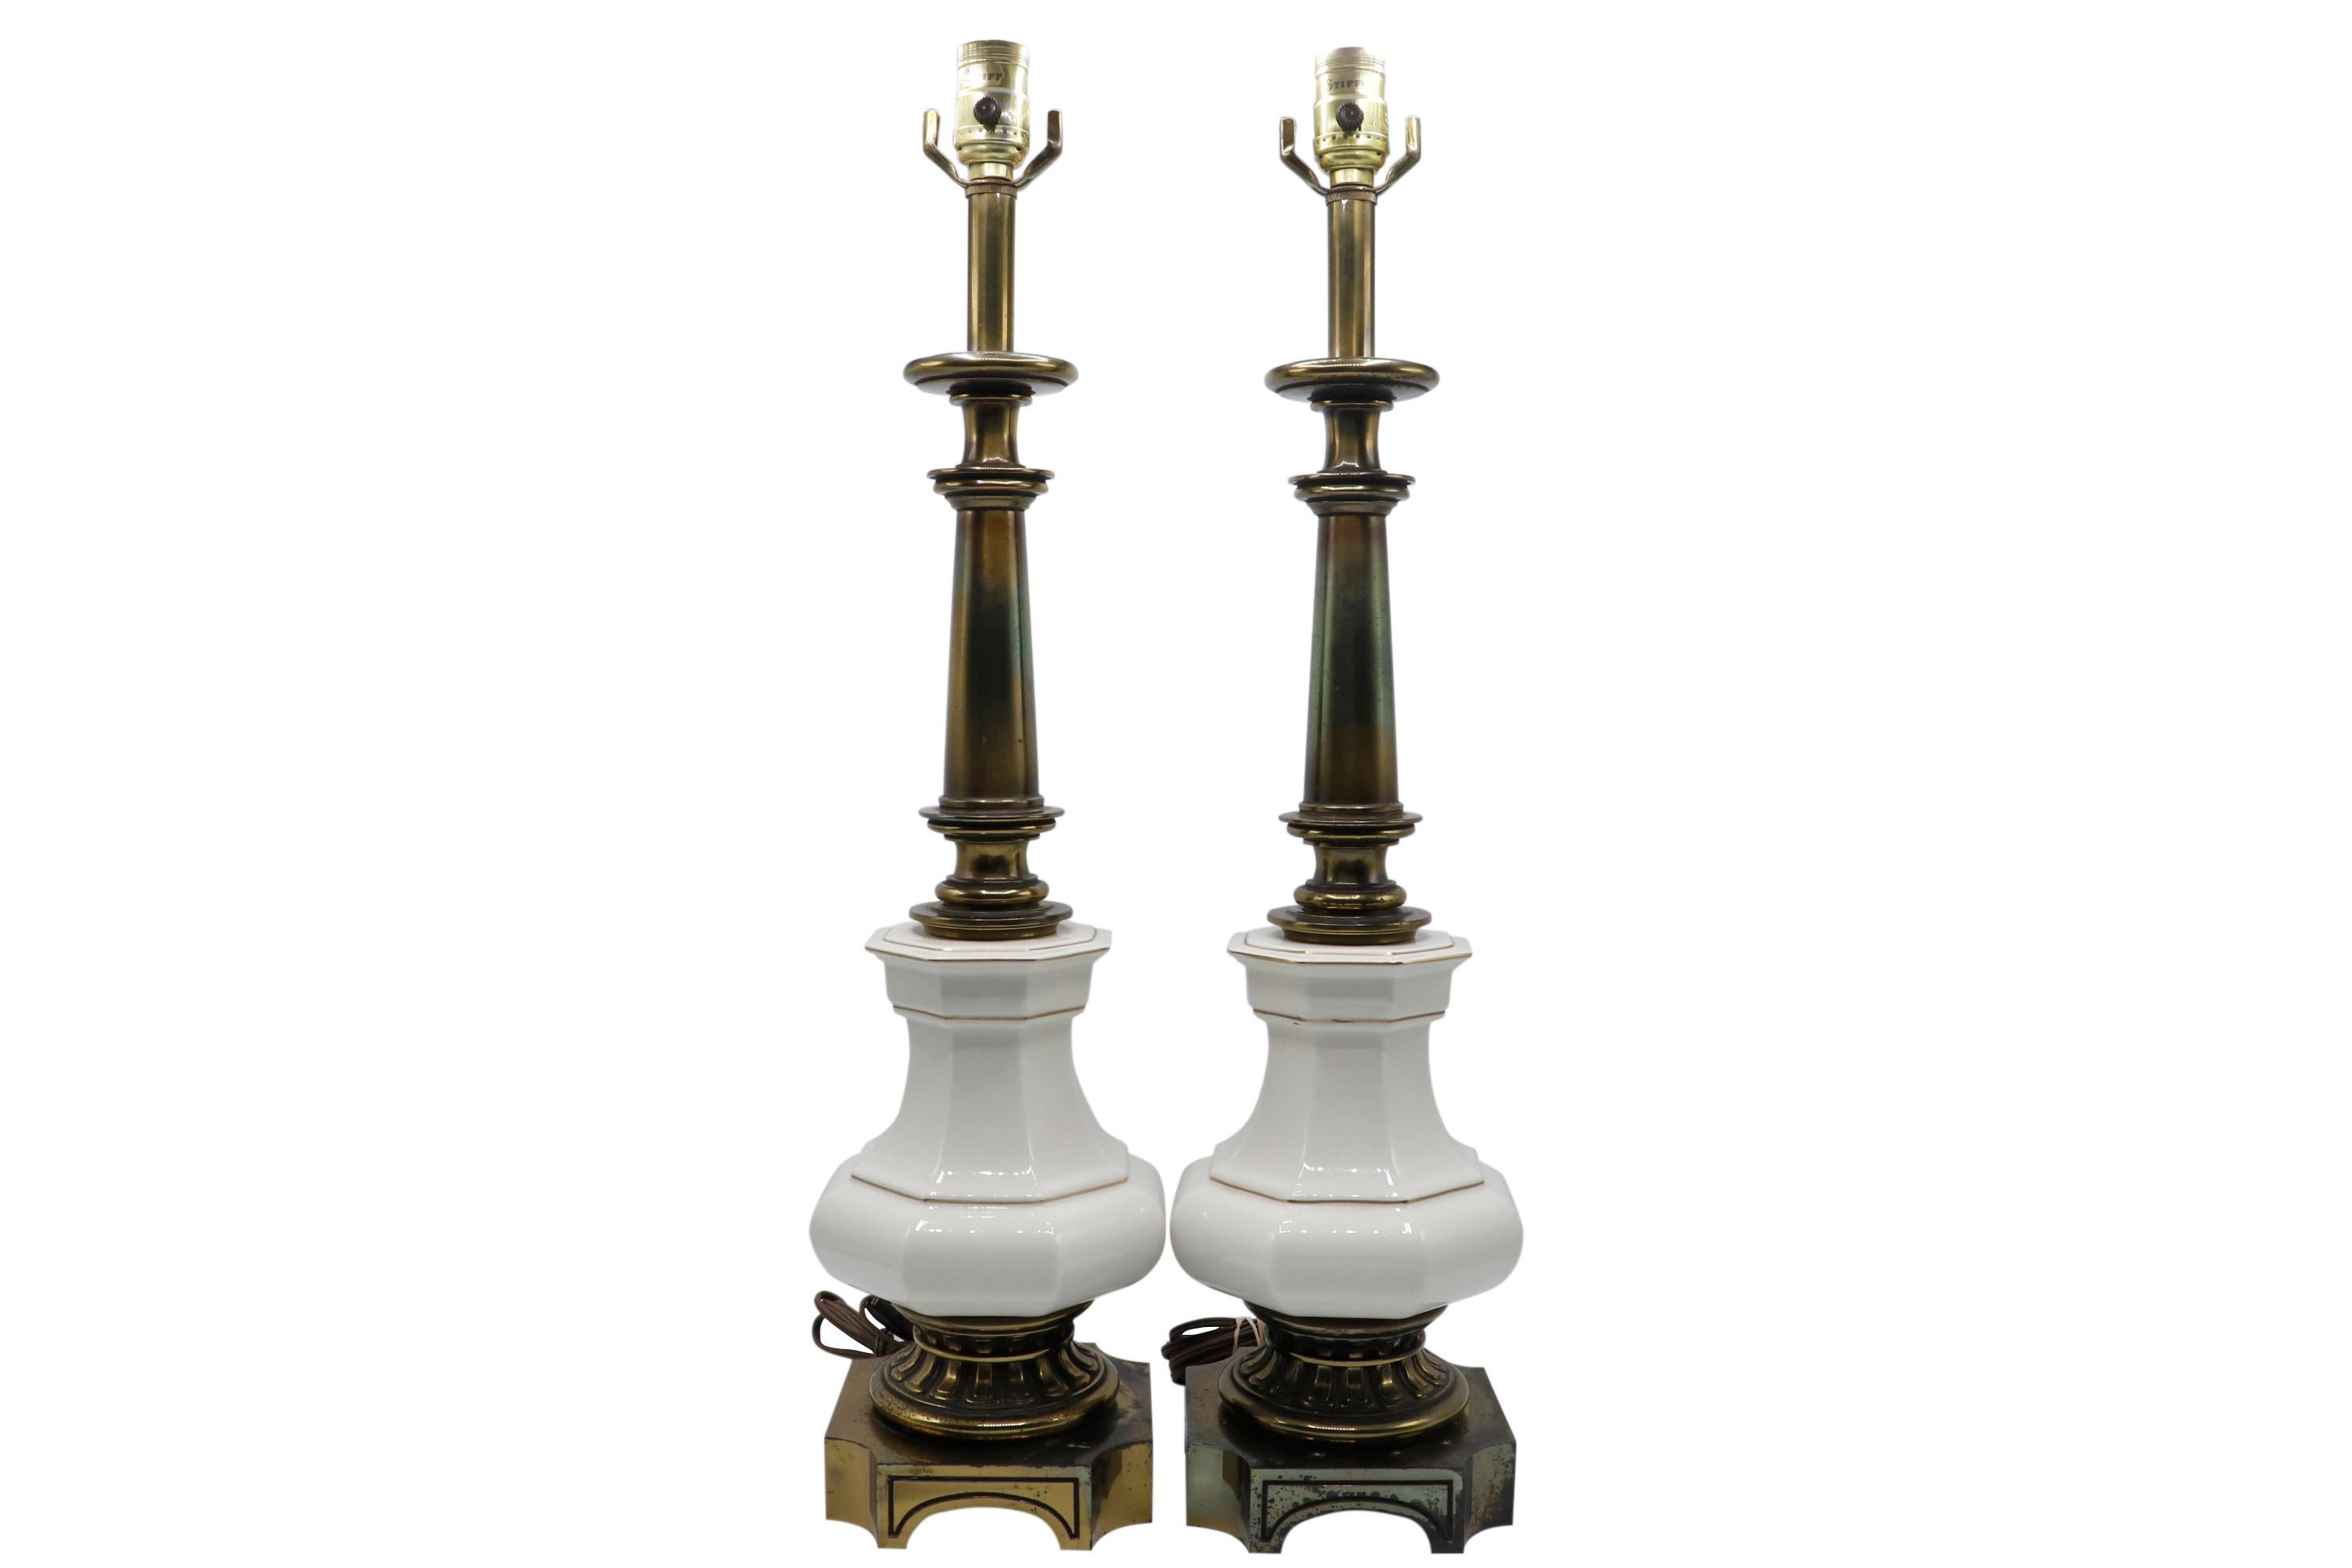 A pair of French Empire style table lamps made by Stiffel. Brass columns are turned with large ceramic fonts in white trimmed in gold. Bases are decorated with dentils on a square base with concave corners. Dimensions per lamp.